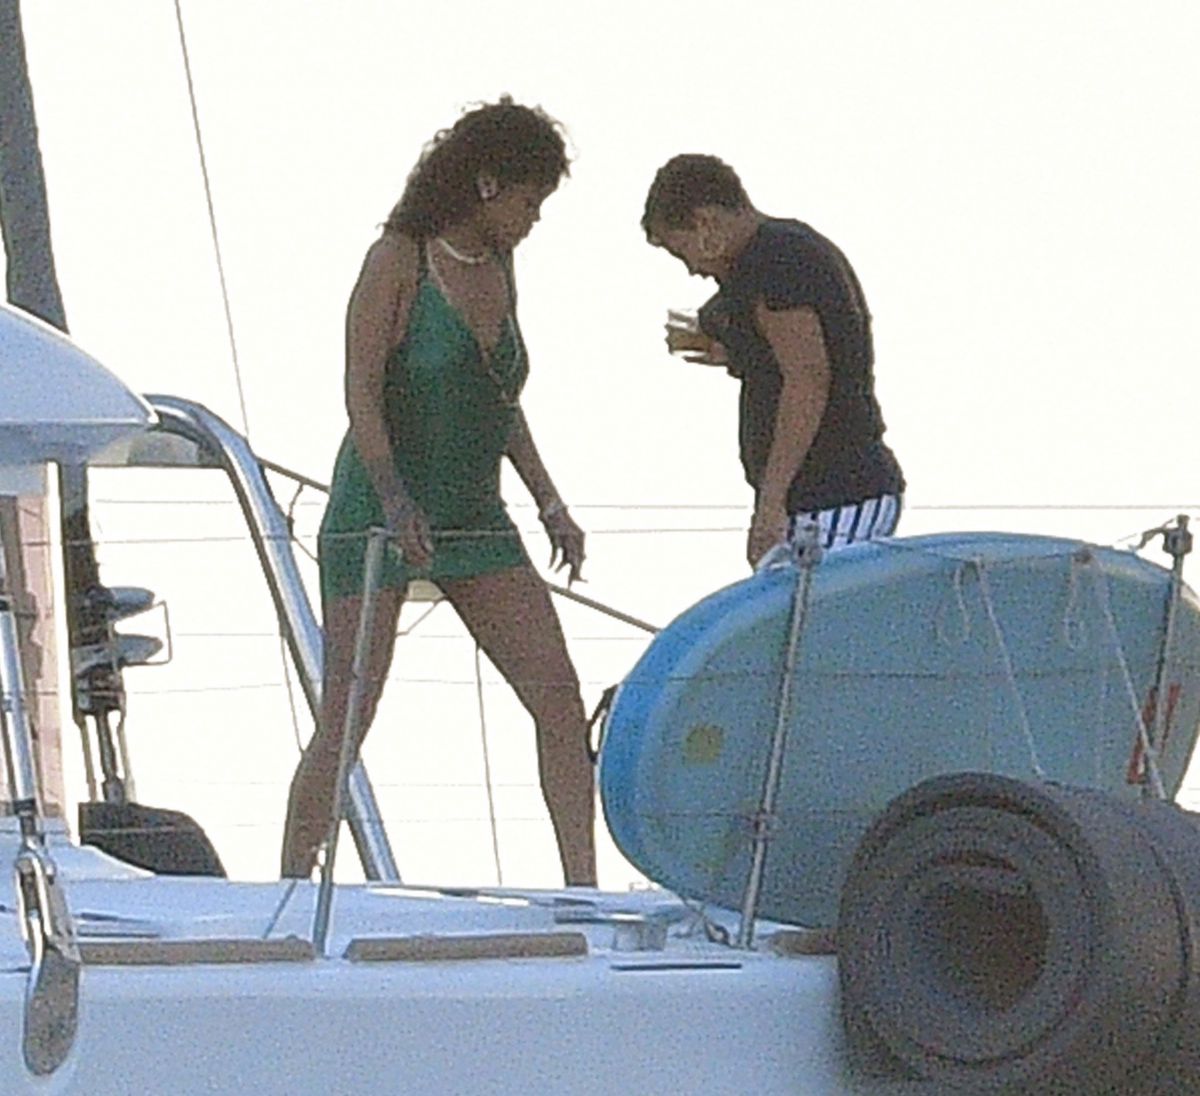 Rihanna And Asap Rocky At A Boat In Barbados 12 28 2020 – Hawtcelebs